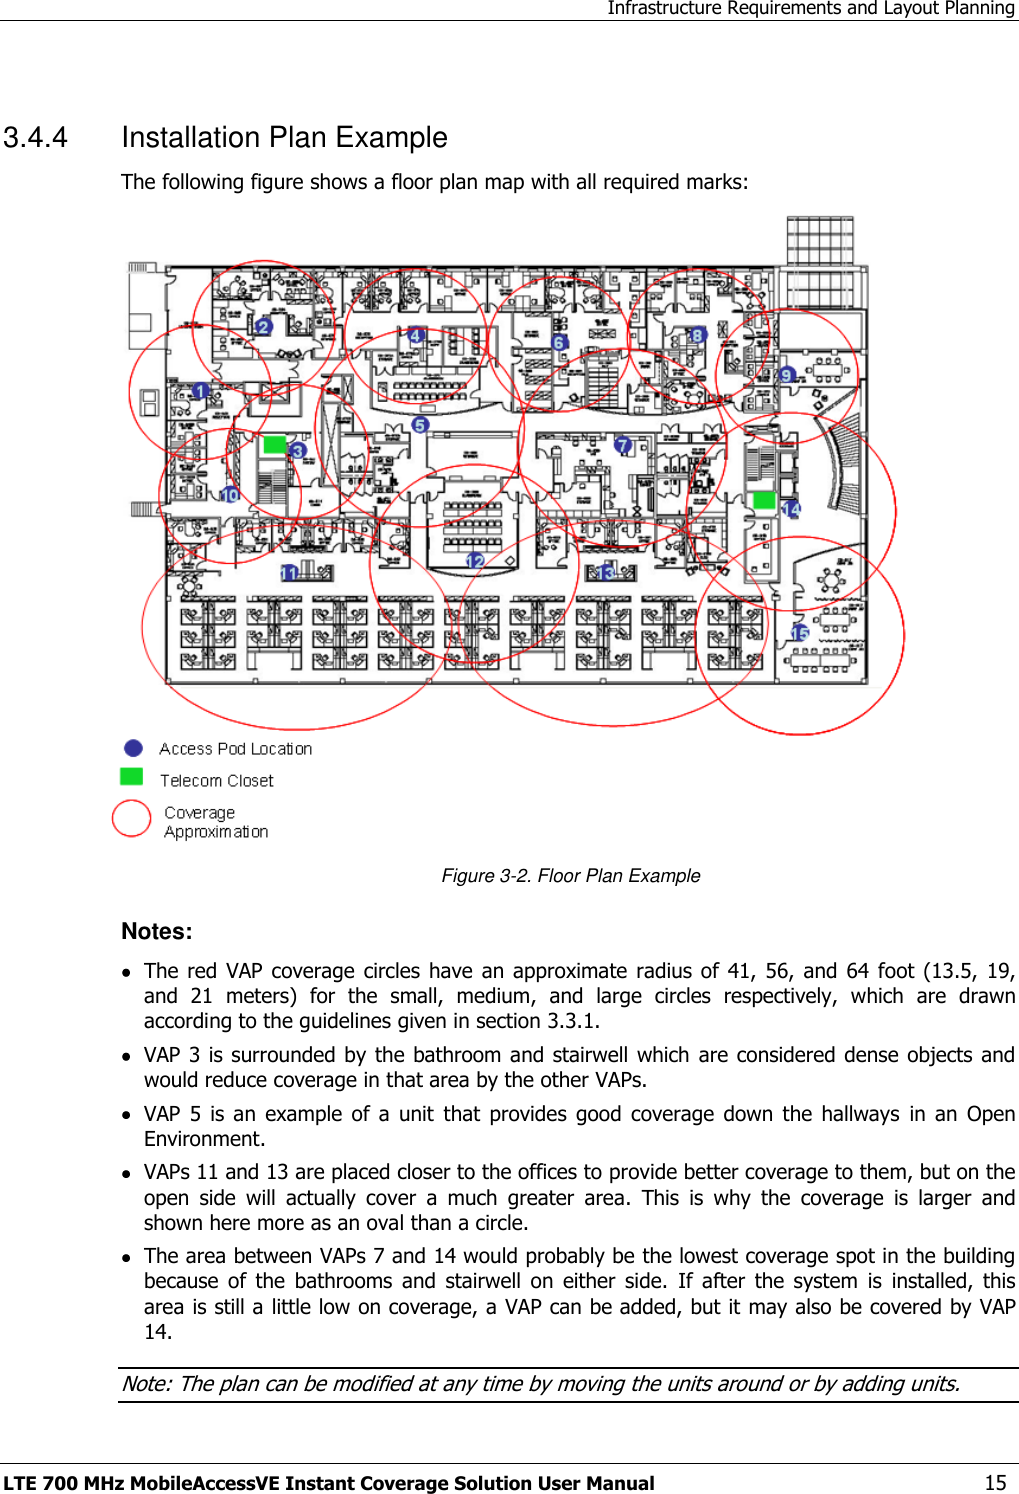 Infrastructure Requirements and Layout Planning LTE 700 MHz MobileAccessVE Instant Coverage Solution User Manual  15  3.4.4  Installation Plan Example The following figure shows a floor plan map with all required marks:  Figure 3-2. Floor Plan Example Notes:  The red  VAP coverage  circles  have an  approximate radius  of  41, 56,  and  64  foot  (13.5, 19, and  21  meters)  for  the  small,  medium,  and  large  circles  respectively,  which  are  drawn according to the guidelines given in section 3.3.1.  VAP 3 is surrounded by the bathroom and stairwell which  are considered dense objects and would reduce coverage in that area by the other VAPs.  VAP  5  is an  example  of  a  unit  that  provides  good  coverage  down  the  hallways  in  an  Open Environment.  VAPs 11 and 13 are placed closer to the offices to provide better coverage to them, but on the open  side  will  actually  cover  a  much  greater  area.  This  is  why  the  coverage  is  larger  and shown here more as an oval than a circle.  The area between VAPs 7 and 14 would probably be the lowest coverage spot in the building because  of  the  bathrooms  and  stairwell  on  either  side.  If  after  the  system  is  installed,  this area is still a little low on coverage, a VAP can be added, but it may also be covered by VAP 14. Note: The plan can be modified at any time by moving the units around or by adding units. 